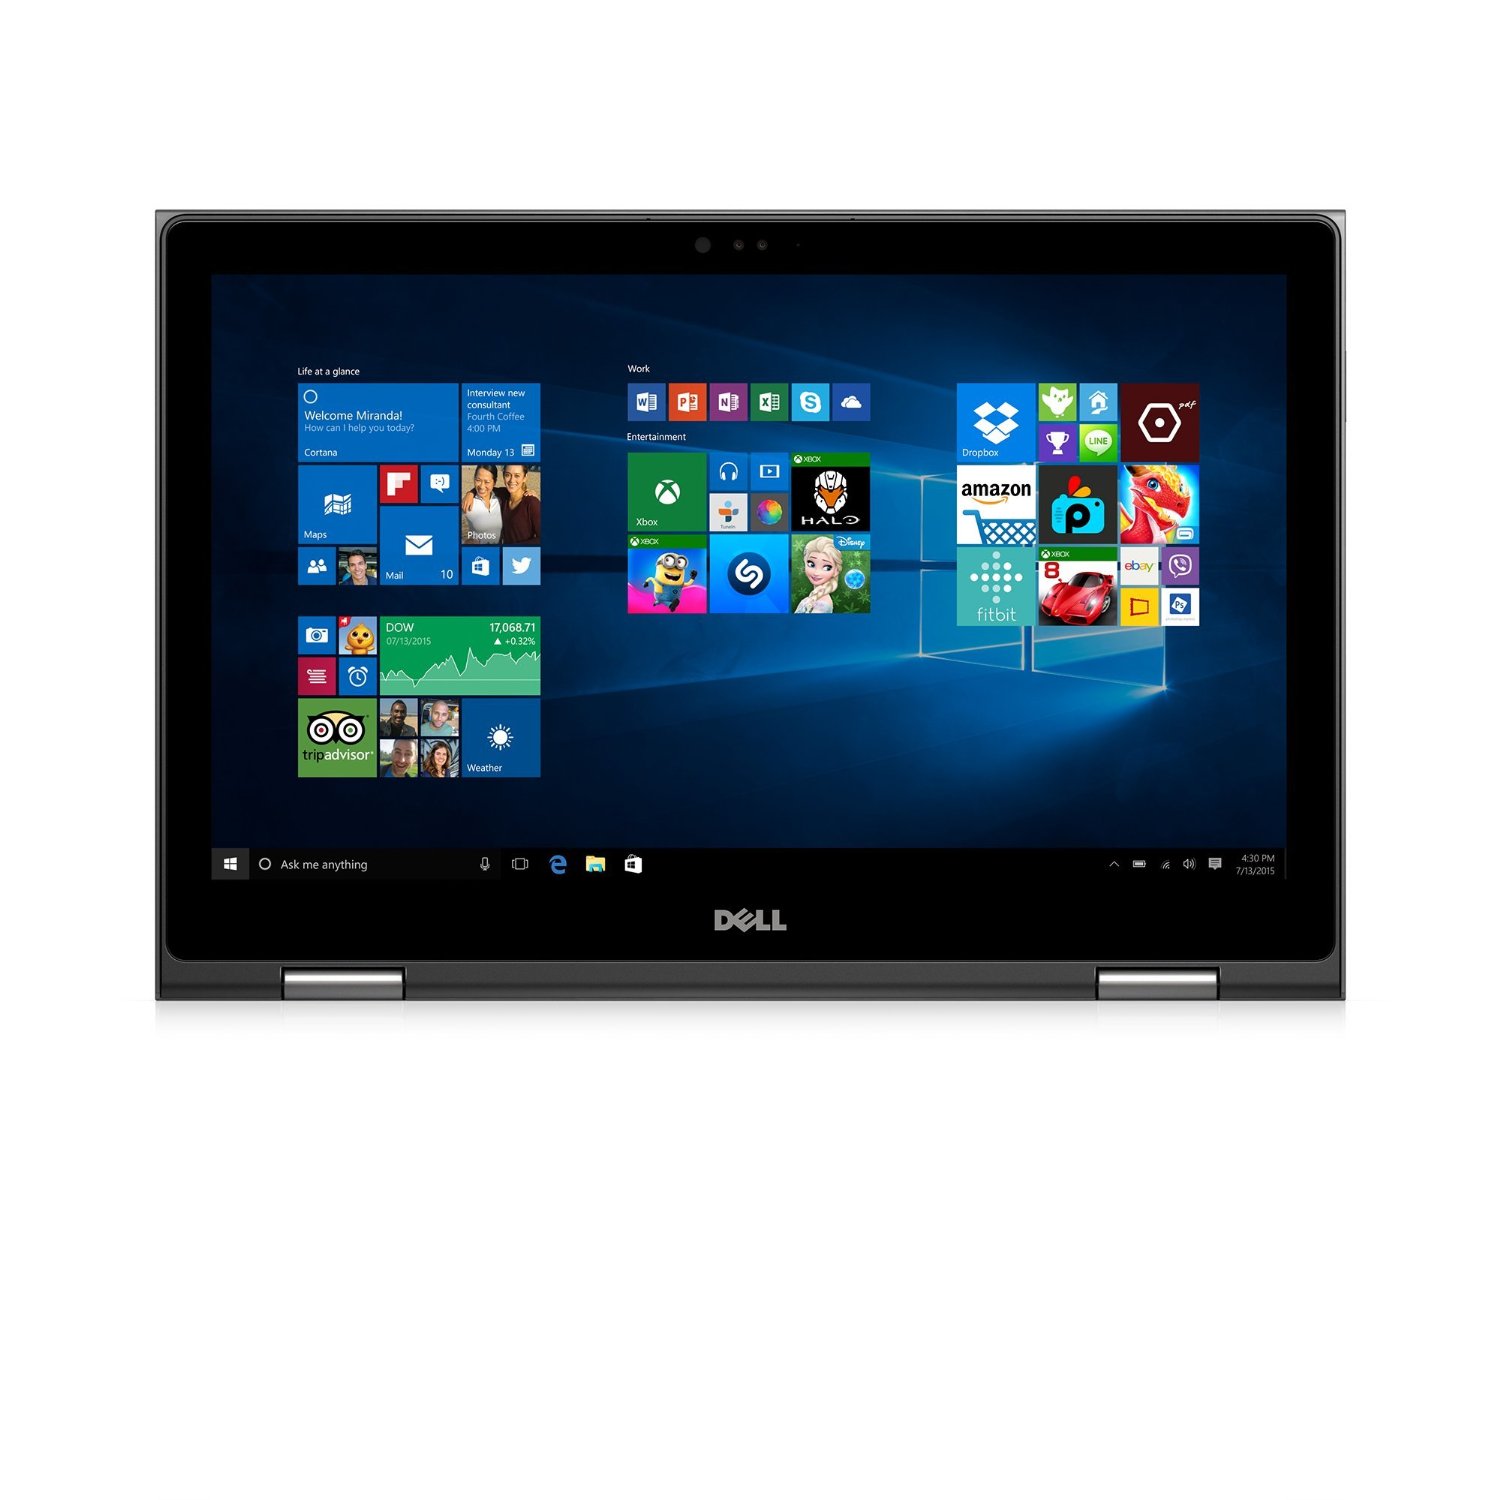 Dell i5568-3746GRY Intel Core i5-6200U 2.3GHz 15.6" 2-in-1 Laptop Computer - image 1 of 11